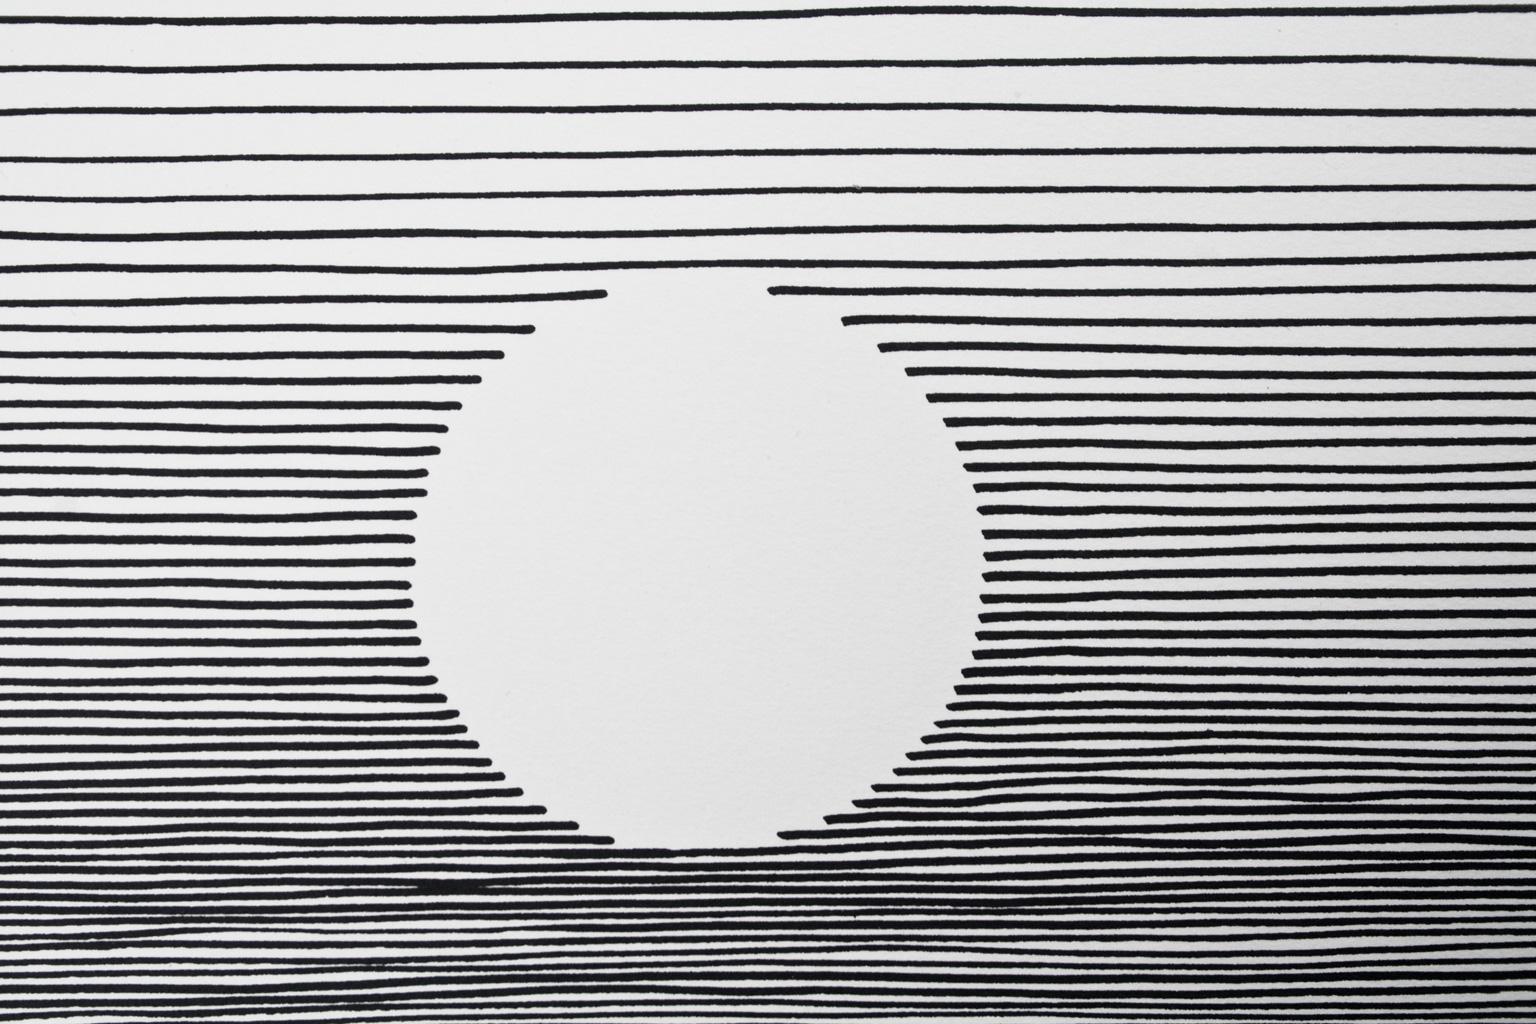 Belgian Abstract Lithograph in Black and White by Michel F. Berckelaers Seuphor, 1980